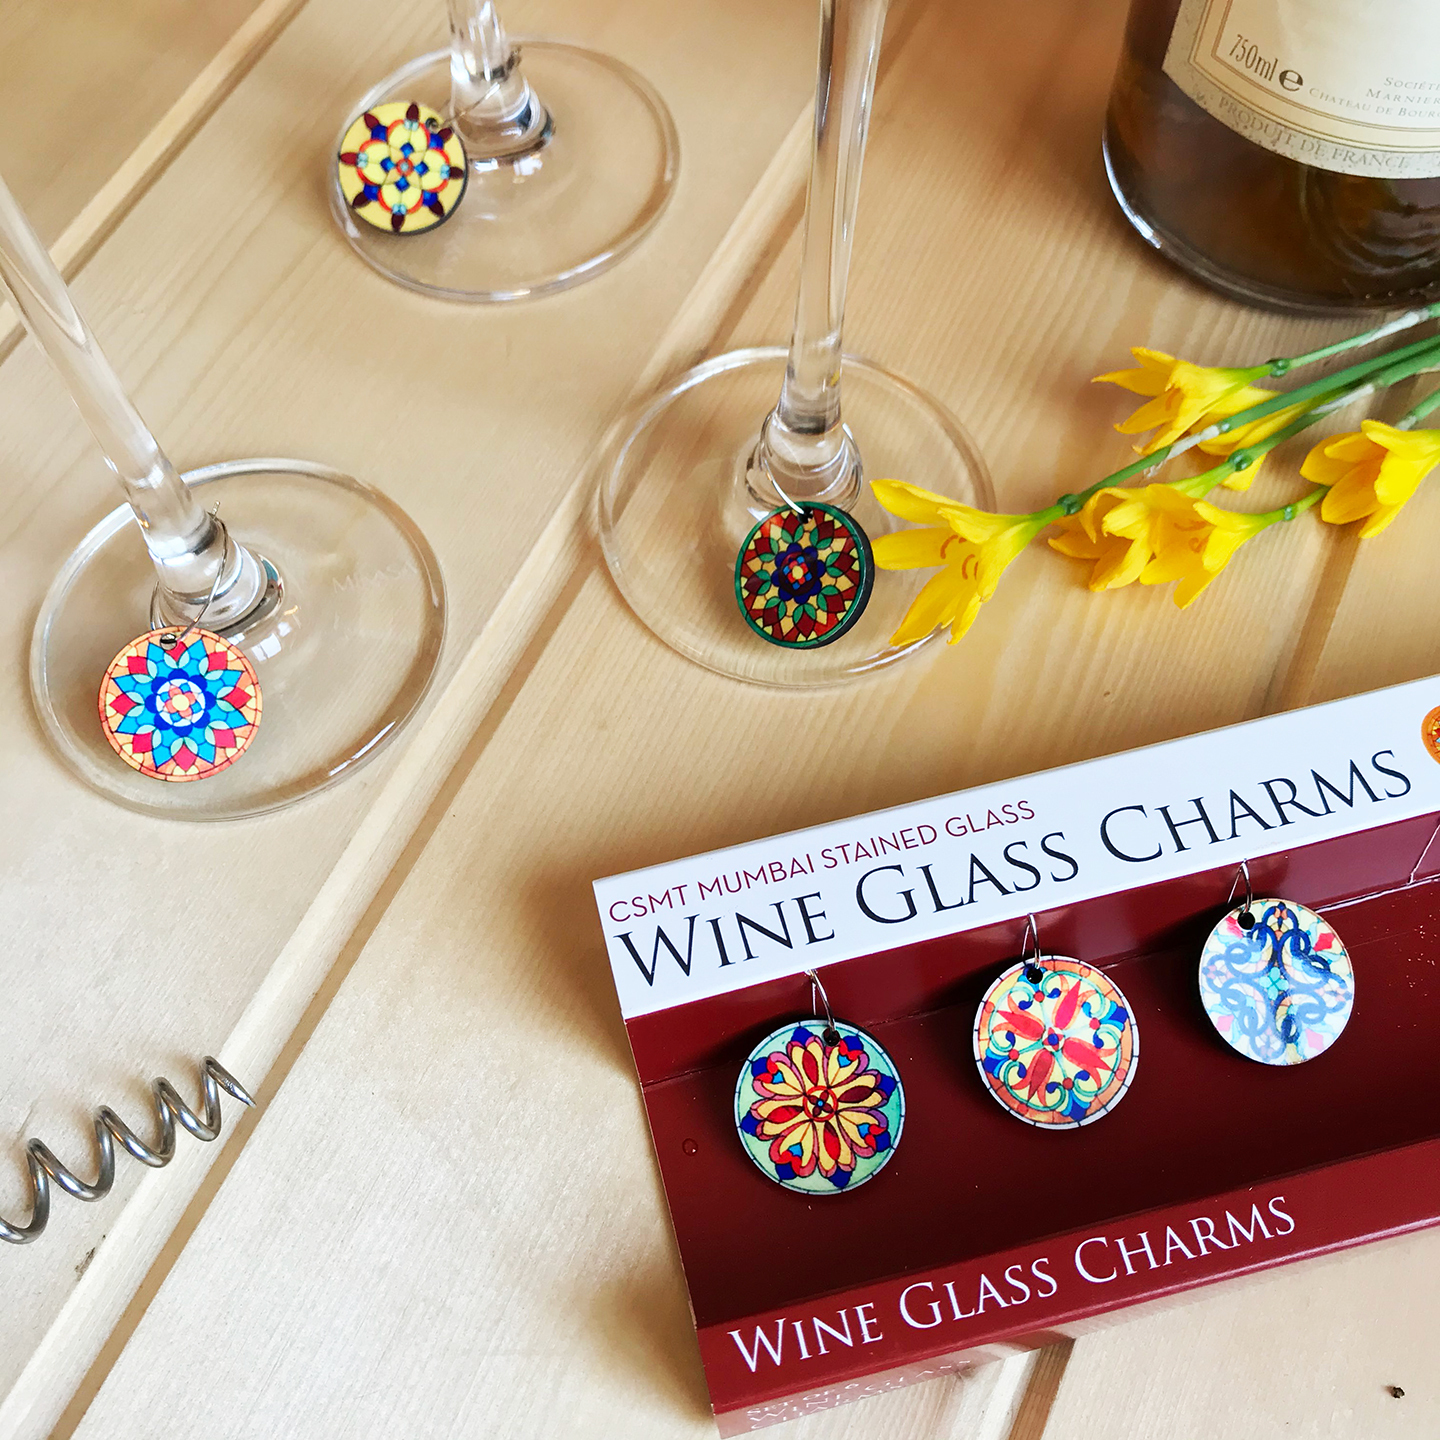 WINE GLASS CHARMS - STAINED GLASS - CST MUMBAI